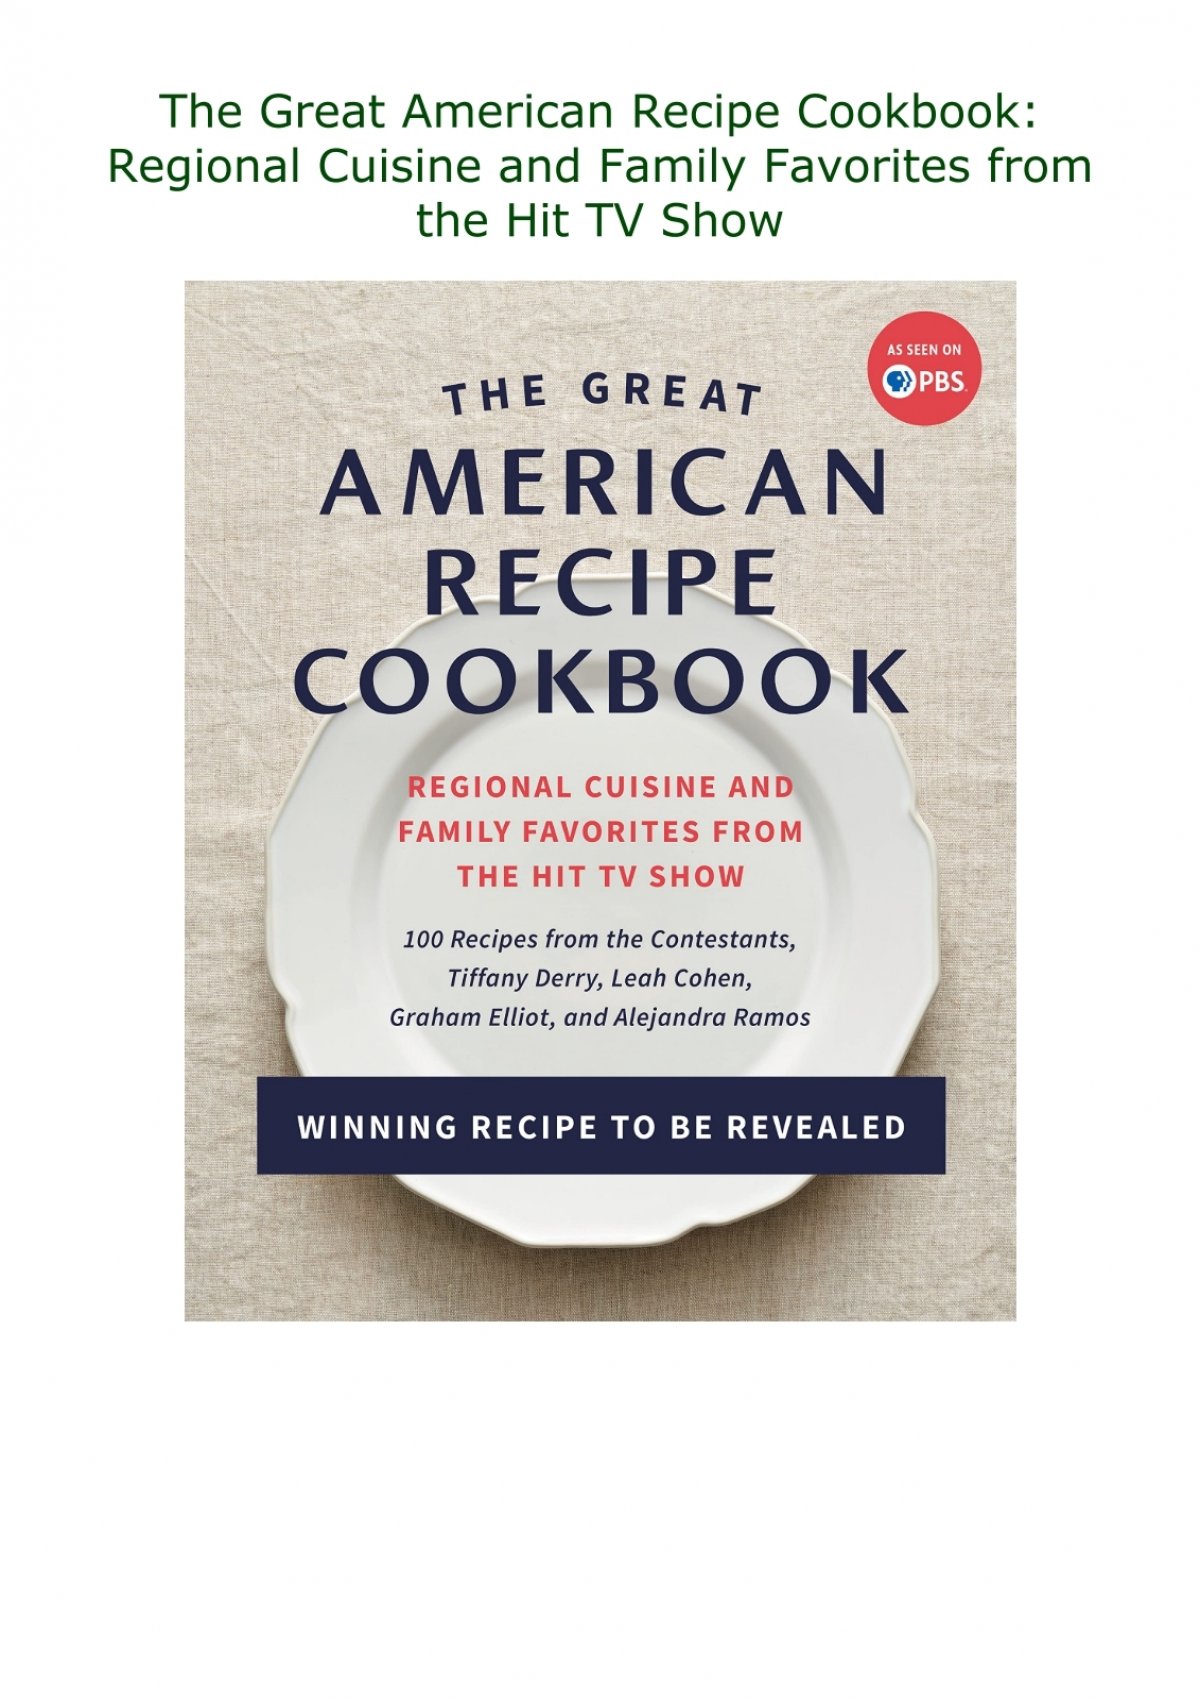 The Great American Recipe Cookbook: Regional Cuisine and Family Favorites from the Hit TV Show [Book]